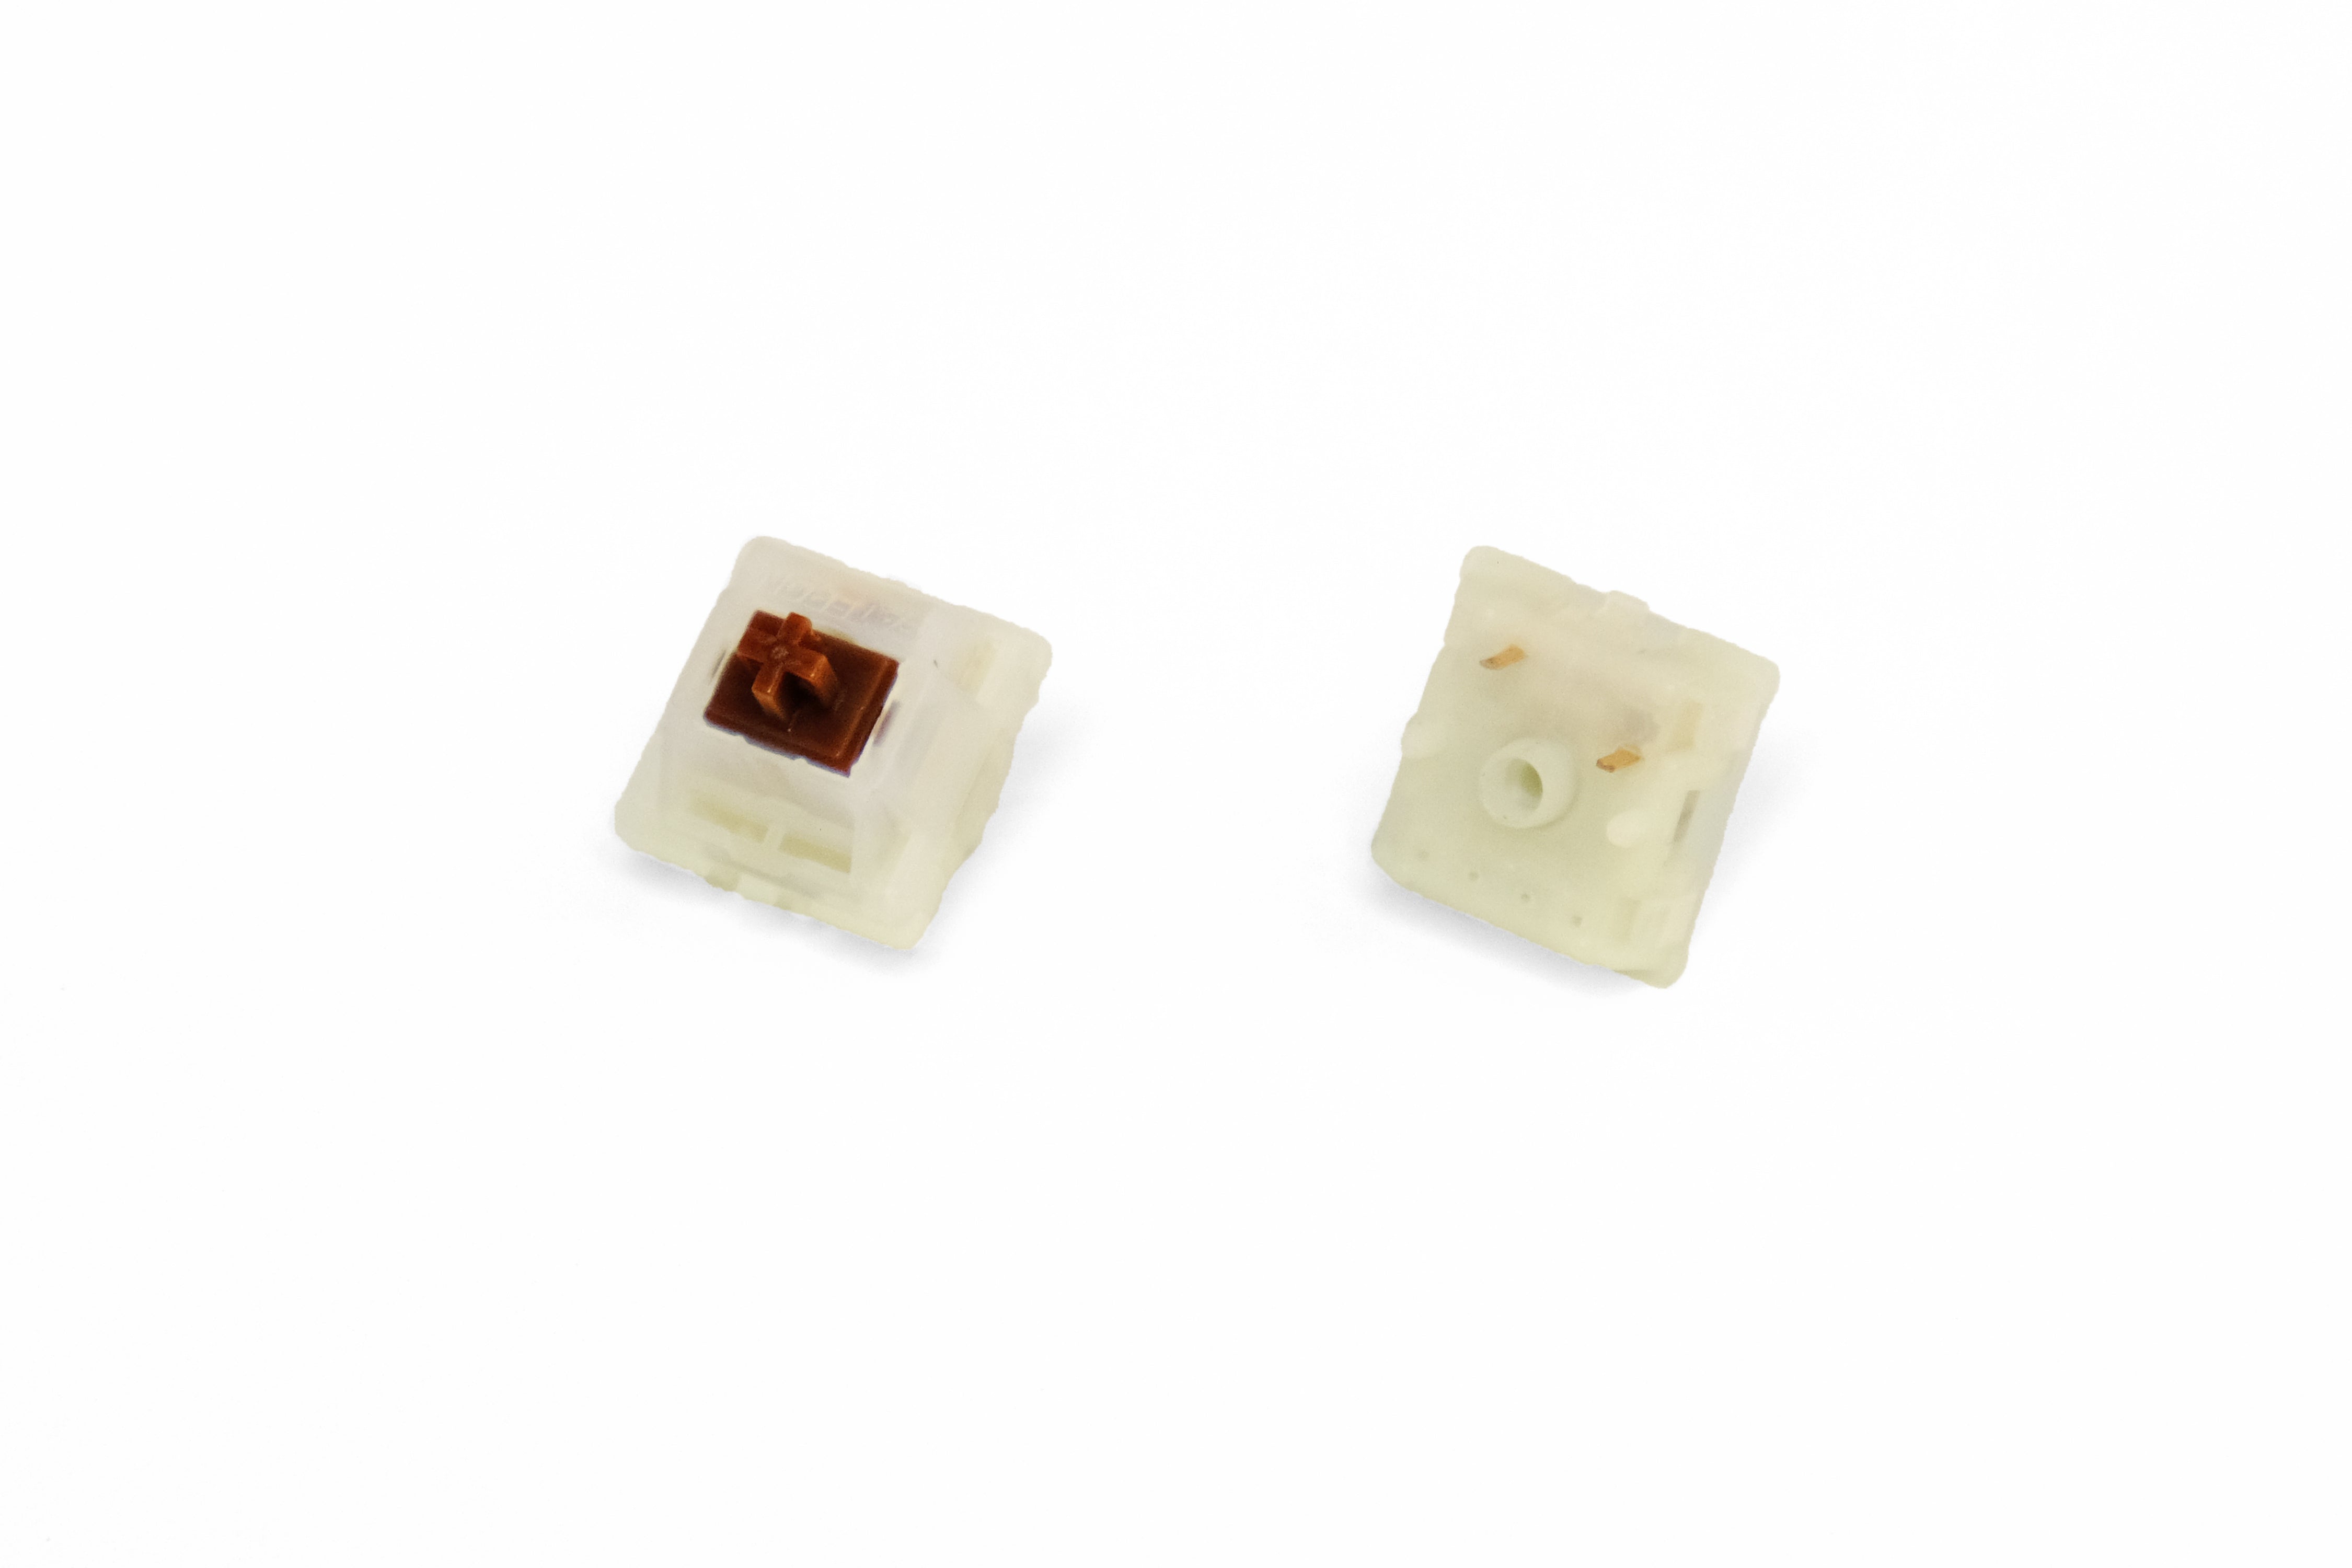 Gateron Cap V2 Milky Brown Tactile Switches at KeebsForAll